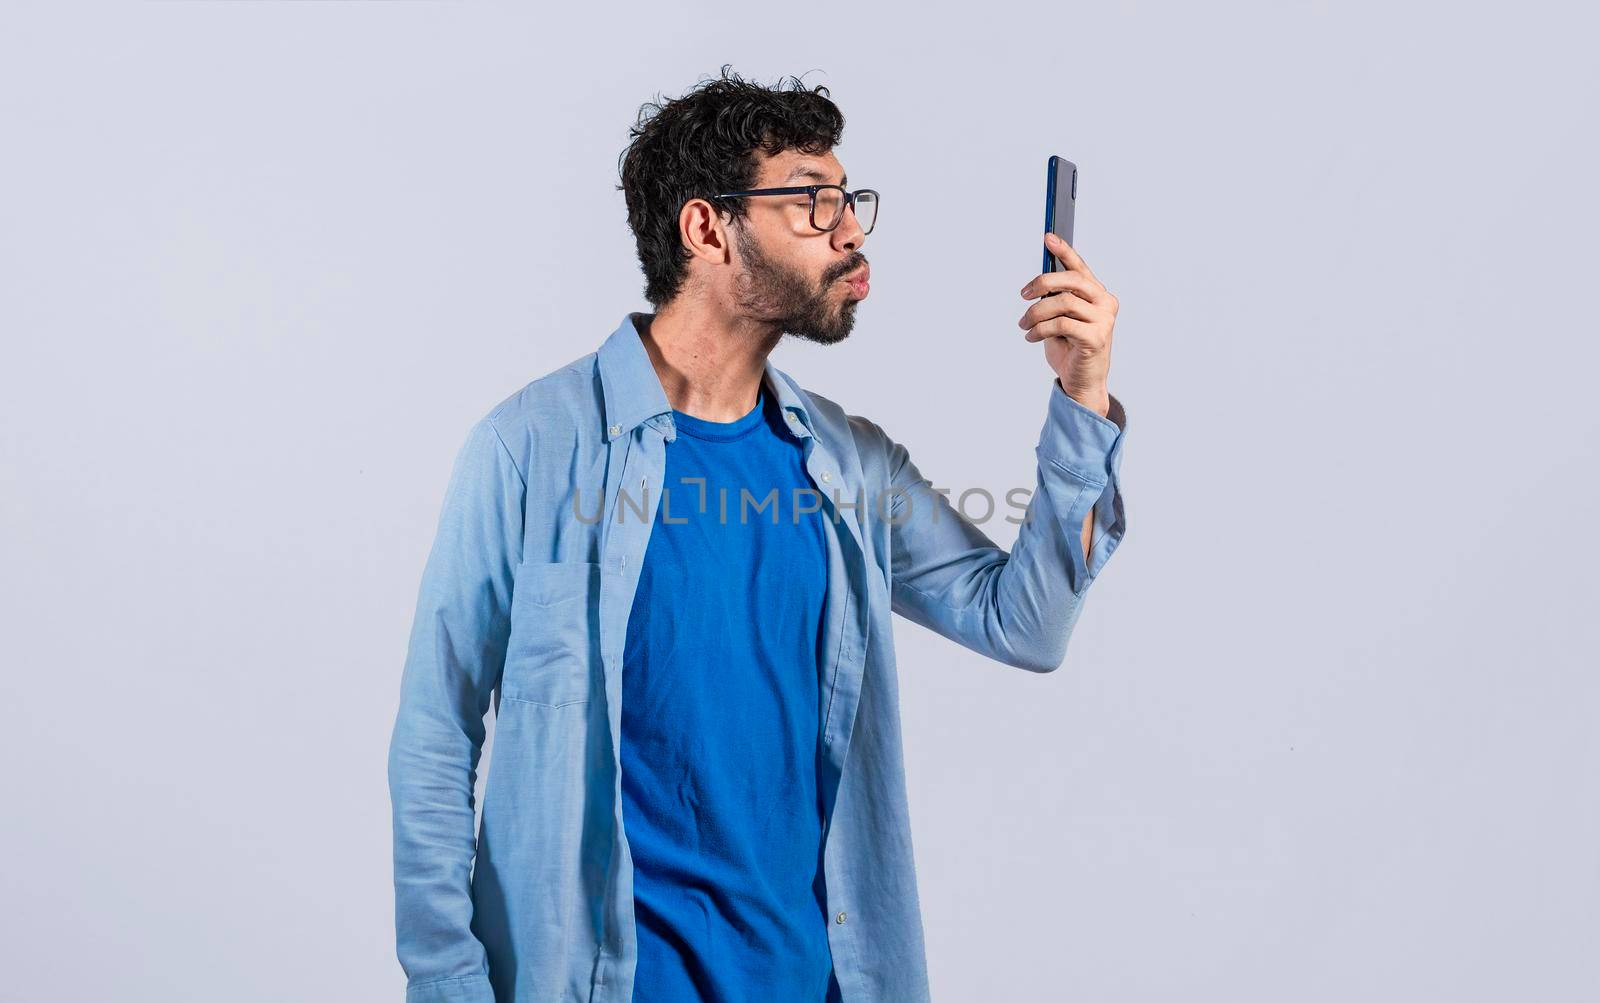 A man blowing kisses on the cell phone isolated, man taking selfie and blowing kisses on the cell phone, A guy blowing kisses on the phone, loving man sending kisses on the phone by isaiphoto